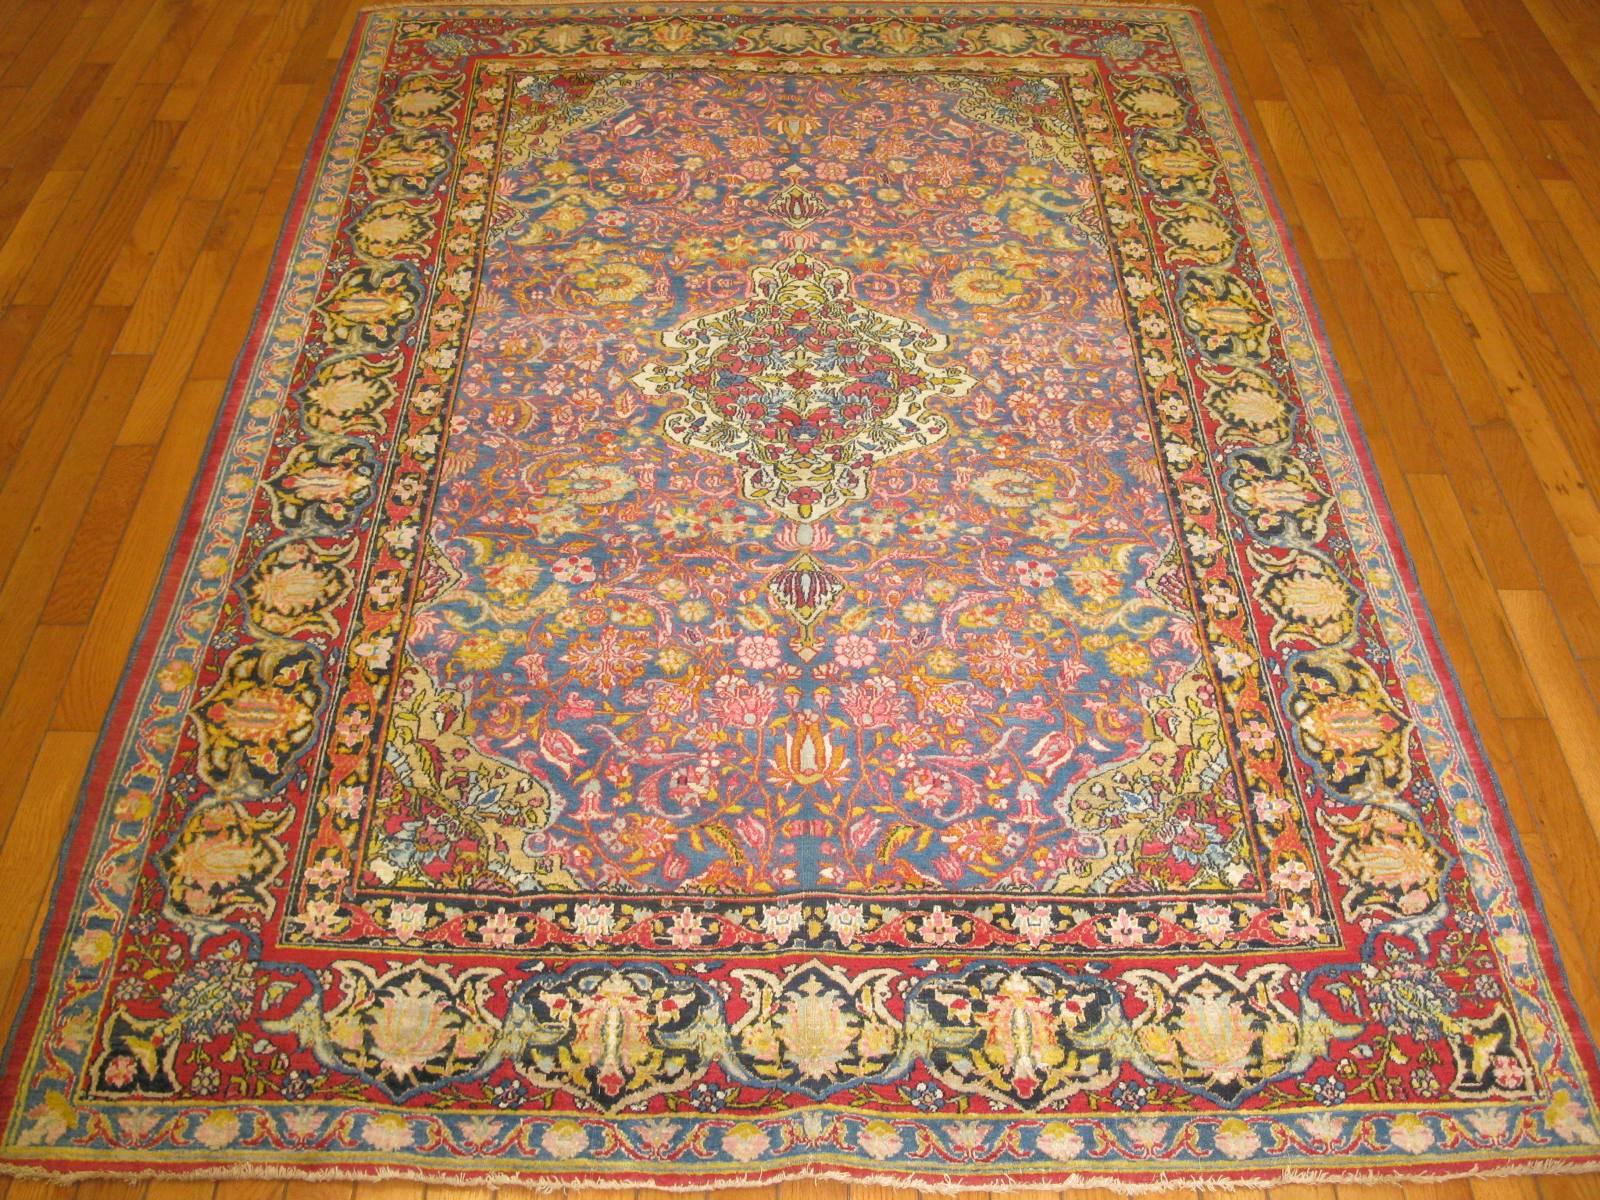 An outstanding antique hand-knotted Persian Isfahan rug with the traditional central and corner medallion design. Its beautiful intricate floral pattern is made on a light blue background and red border. The rug is in excellent condition and